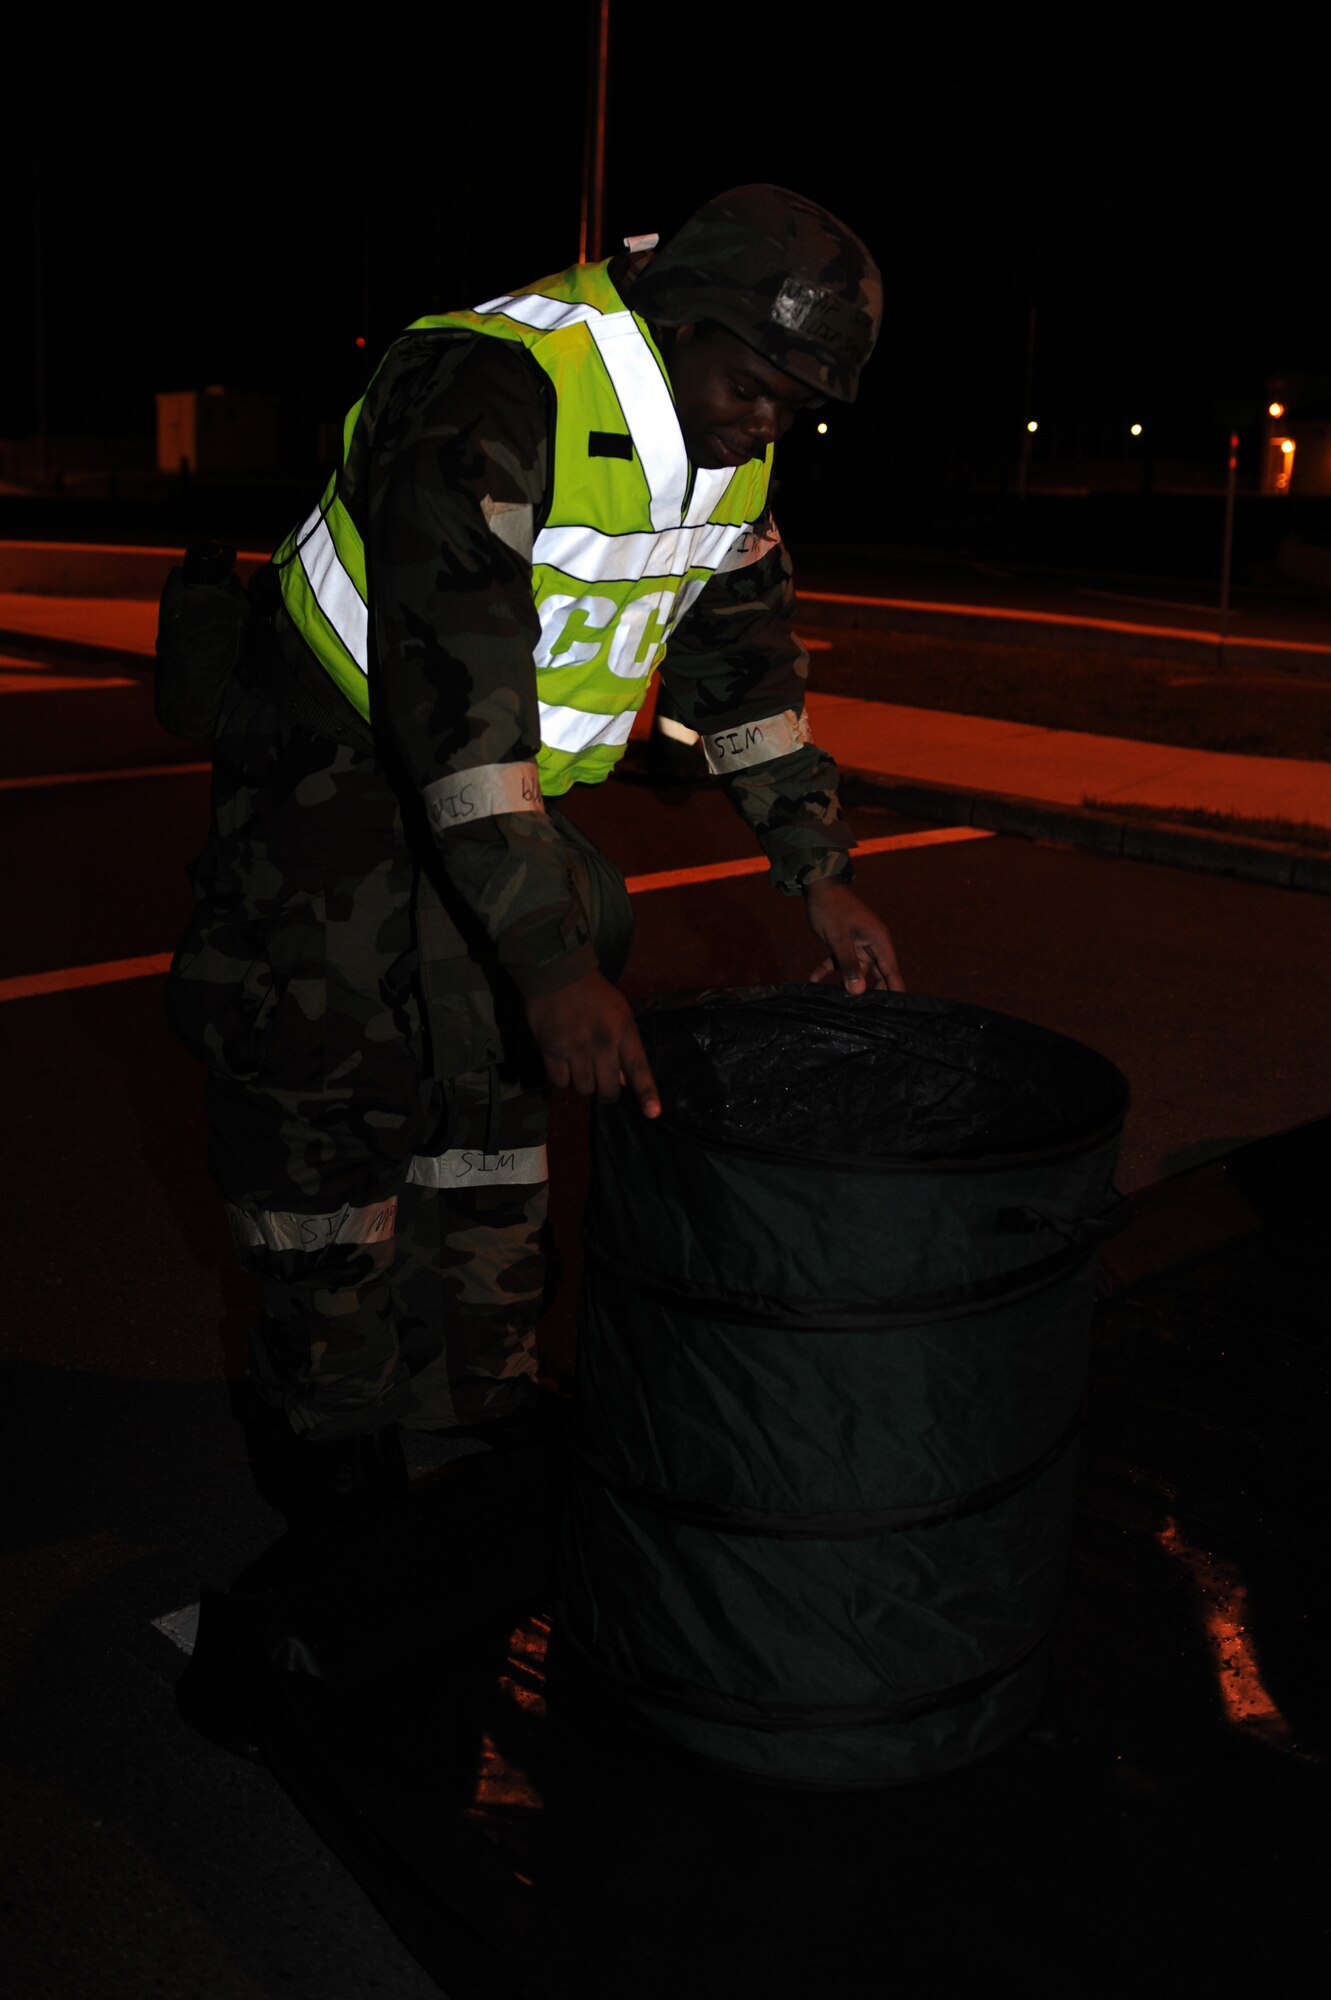 MISAWA AIR BASE, Japan – Senior Airman Phillip Sneed, 35th Medical Support Squadron, places a decontamination bin at a contamination control area during an operational readiness exercise here Nov. 8. The 35th Fighter Wing is preparing for an operational readiness inspection in December. (U.S. Air Force photo by Airman 1st Class Kia Atkins)